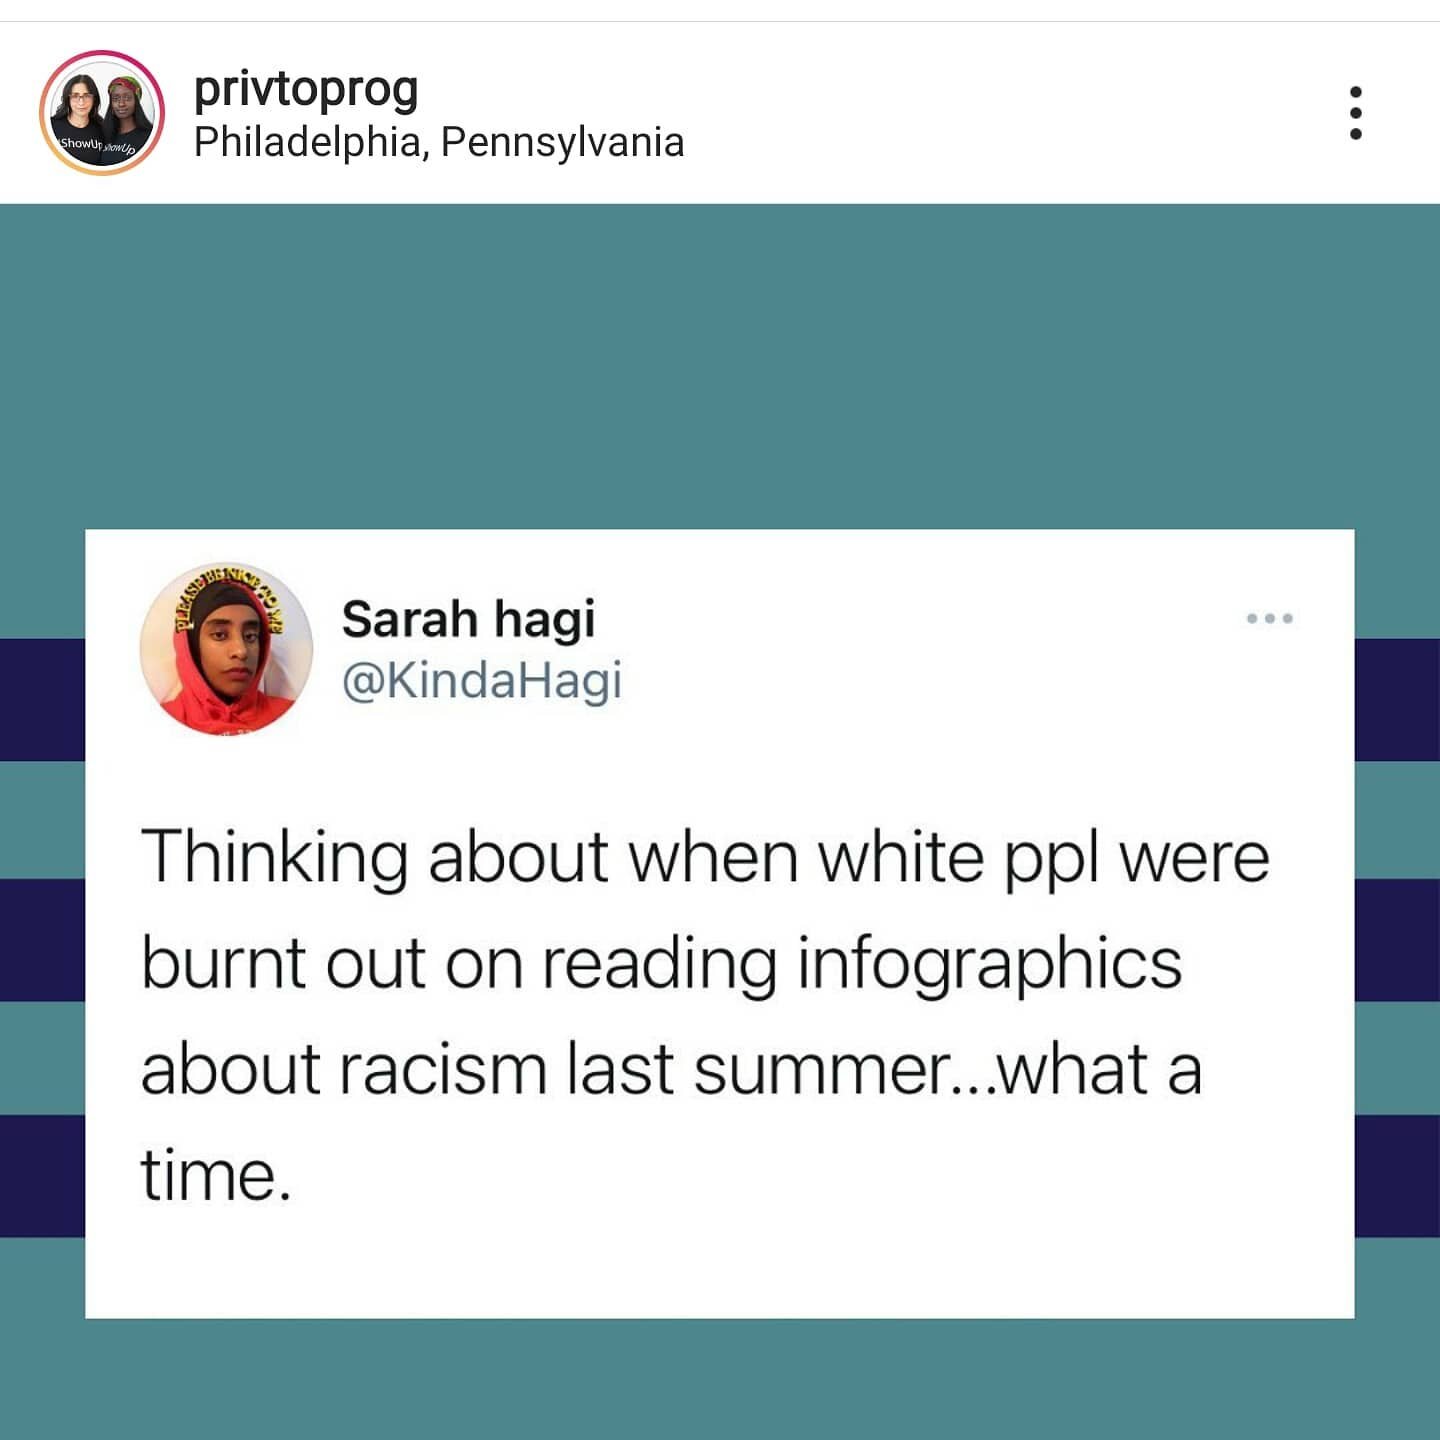 Yeah, that was a rough time wasn't it? There was definitely some chakra clearing and green smoothies after that drama. Let's hope our friends can continue learning about racism without getting &quot;burntout&quot; 😂

#AntiRacism #RacialJustice #Raci